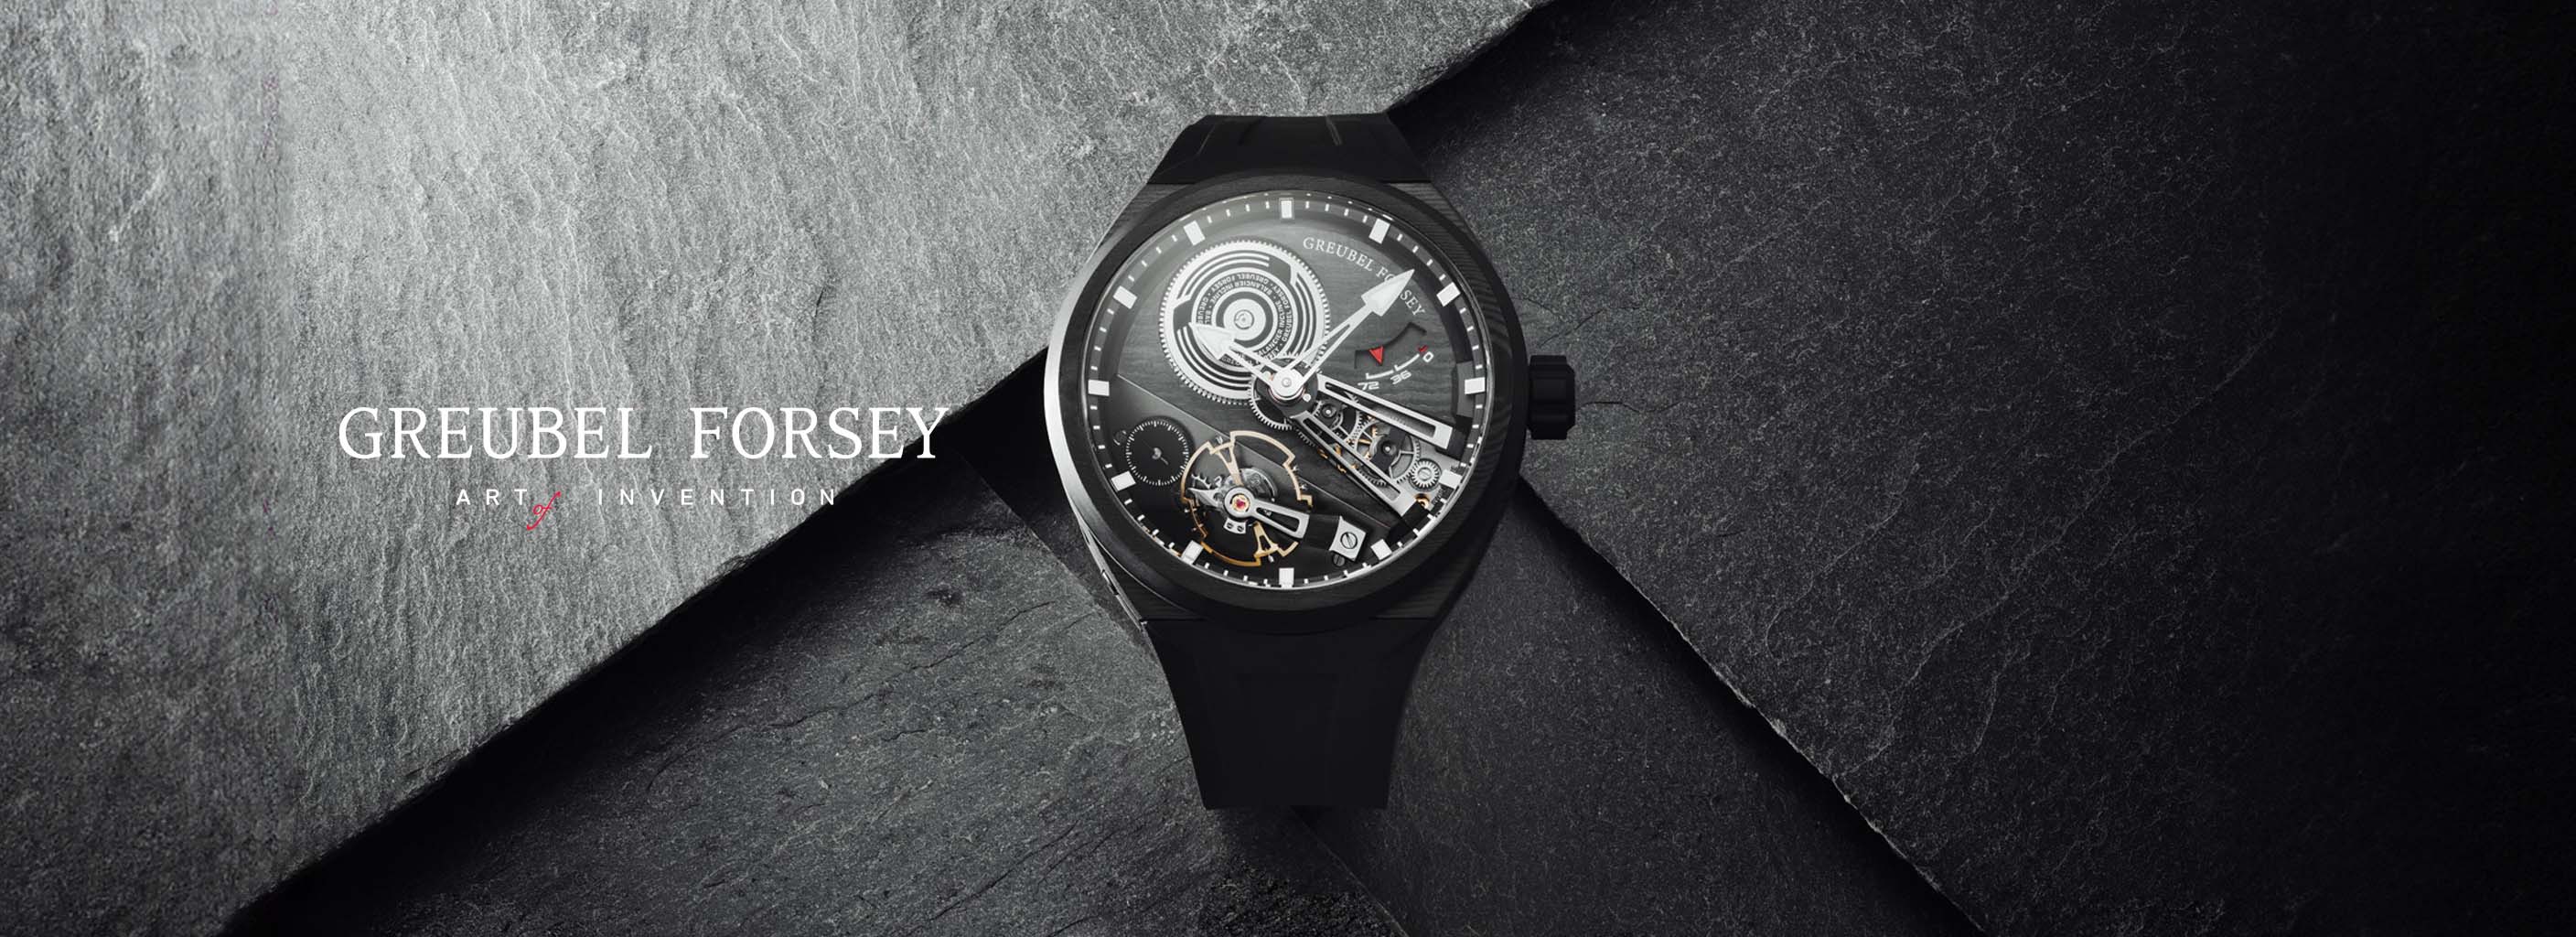 greubel-forsey-home-page-banner